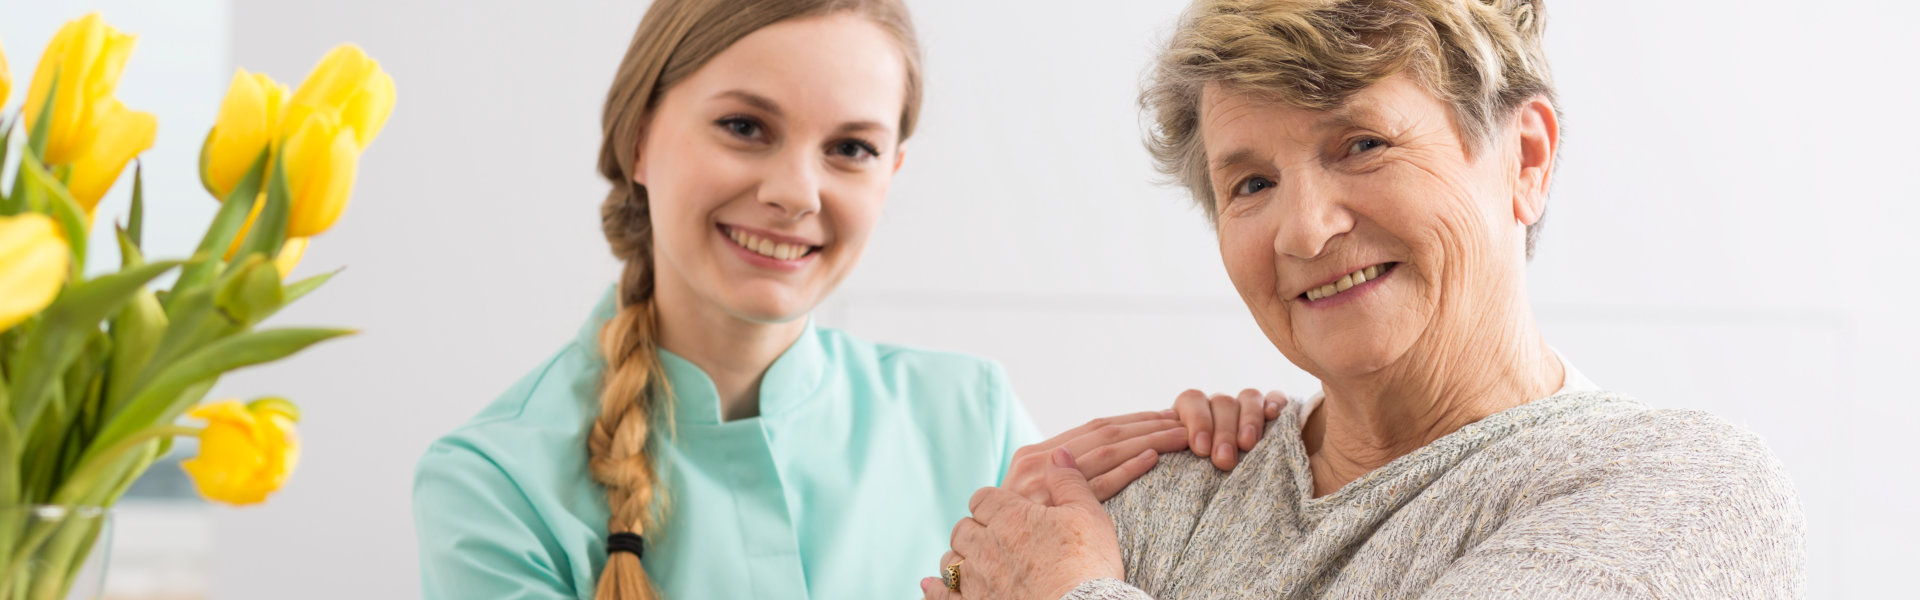 Female caregiver and elderly woman smiling